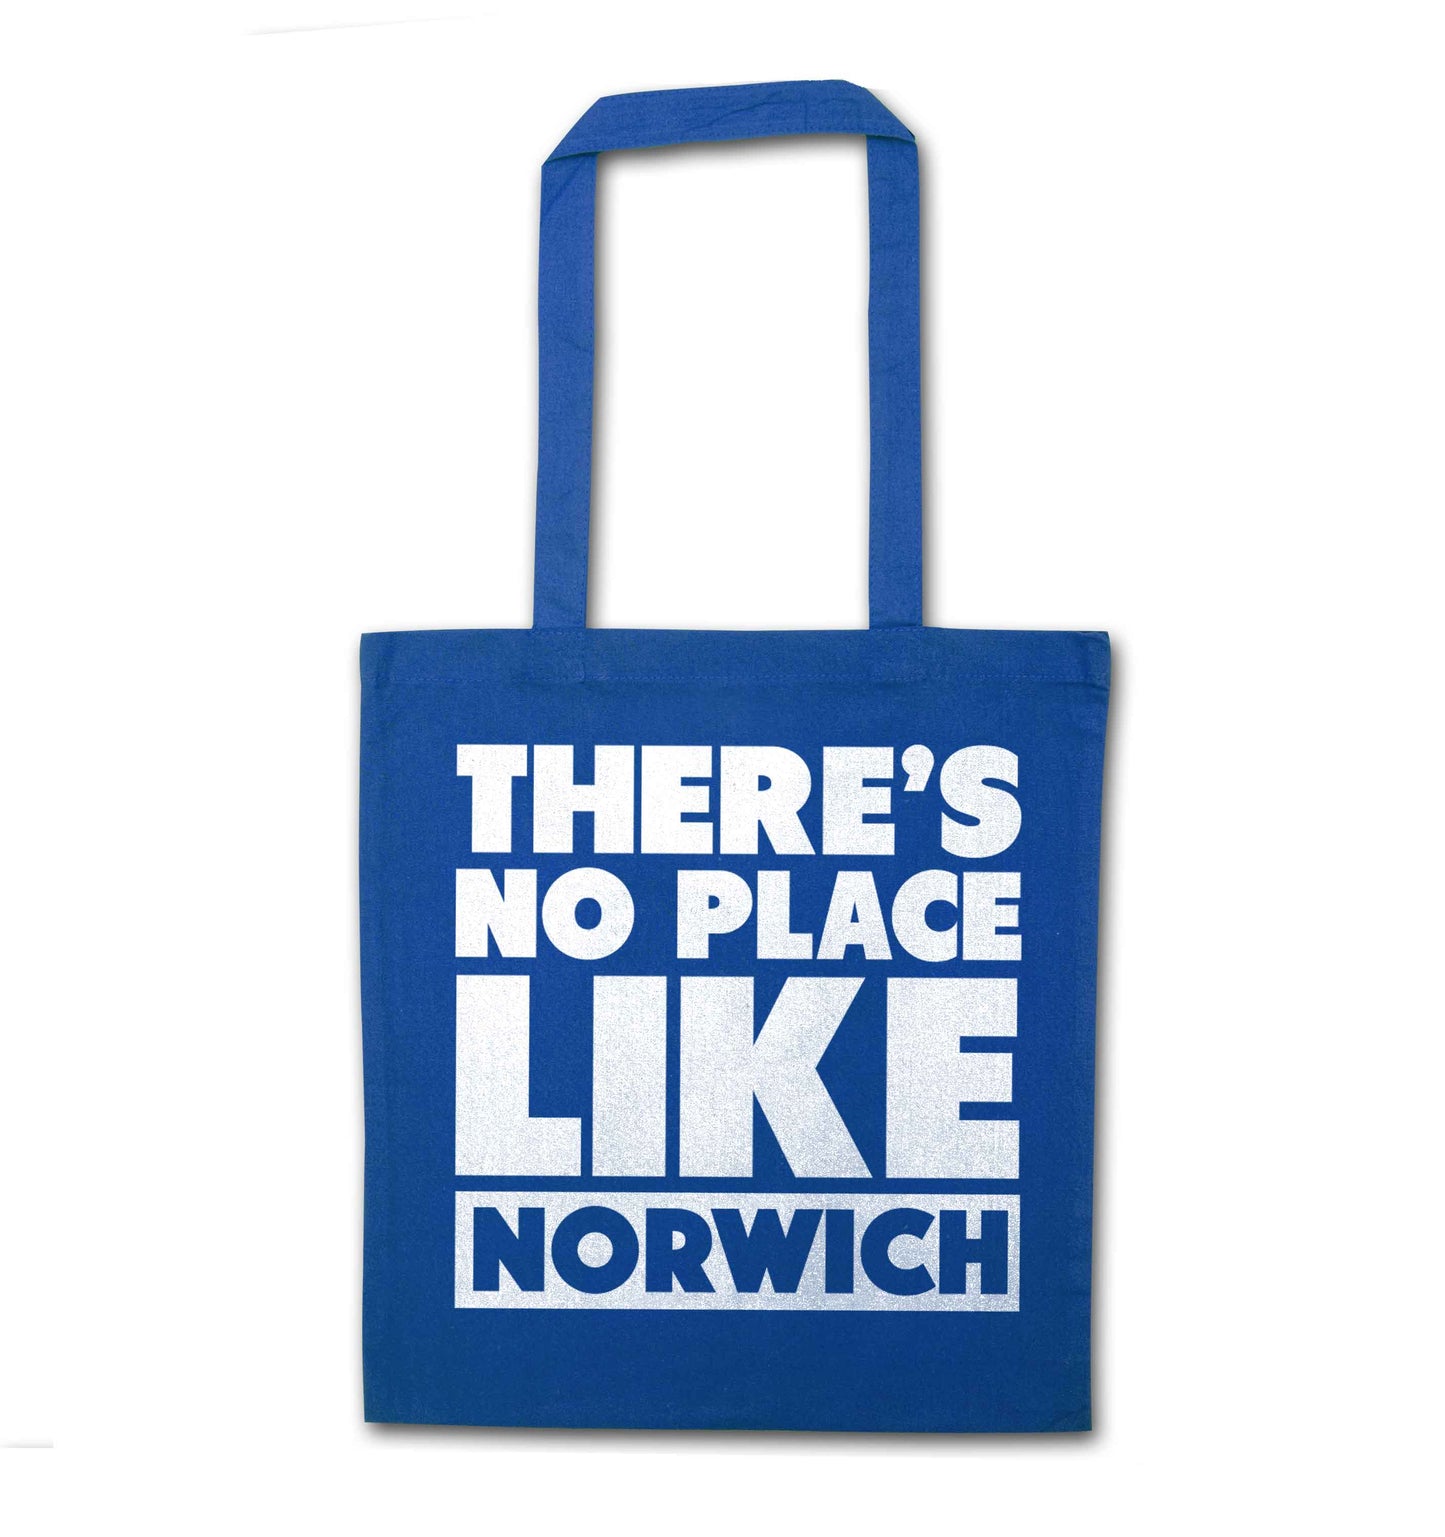 There's no place like Norwich blue tote bag